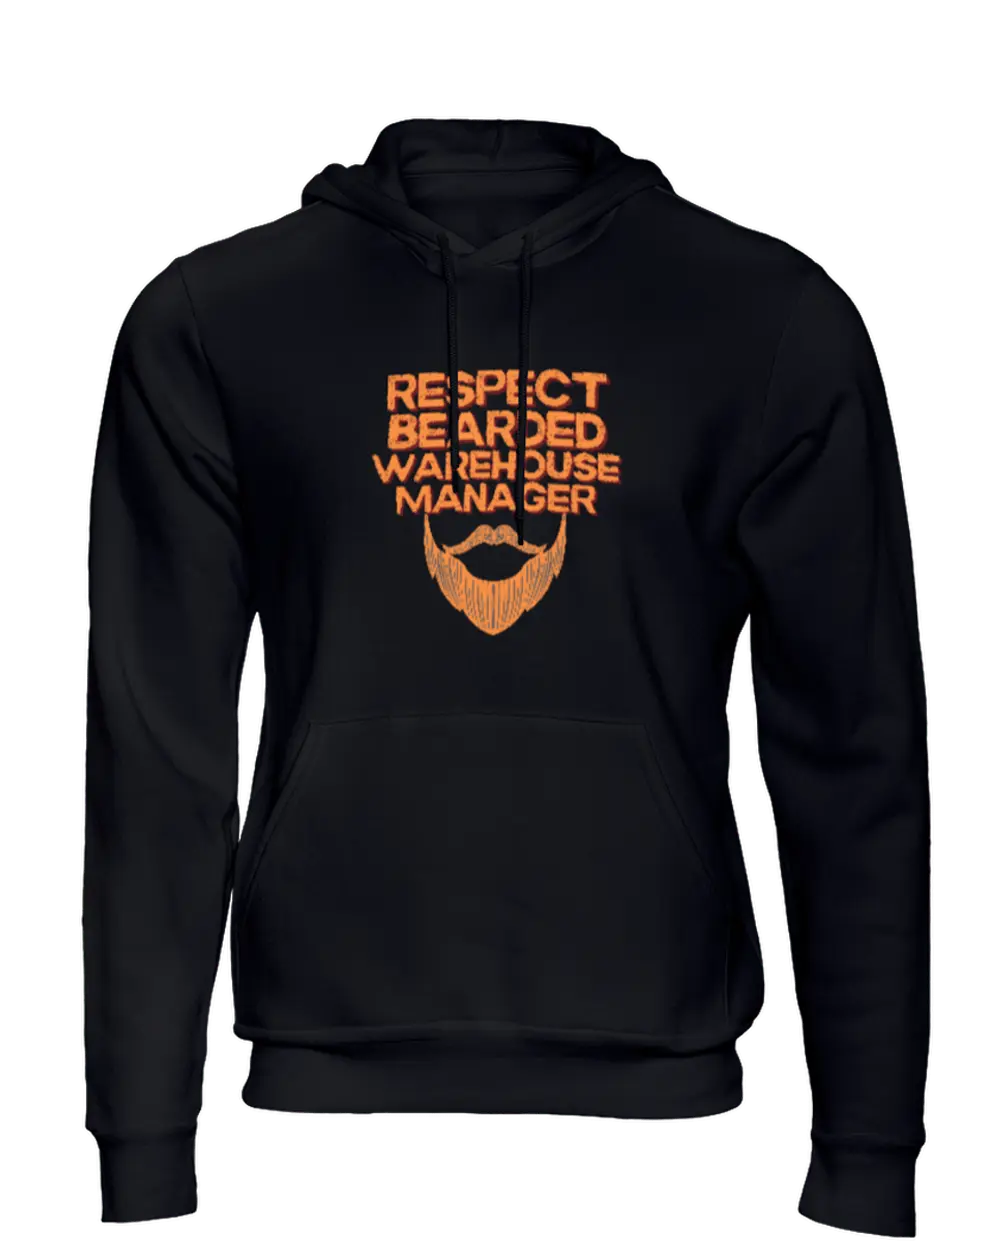 Bearded Warehouse Manager Men's Hoodie